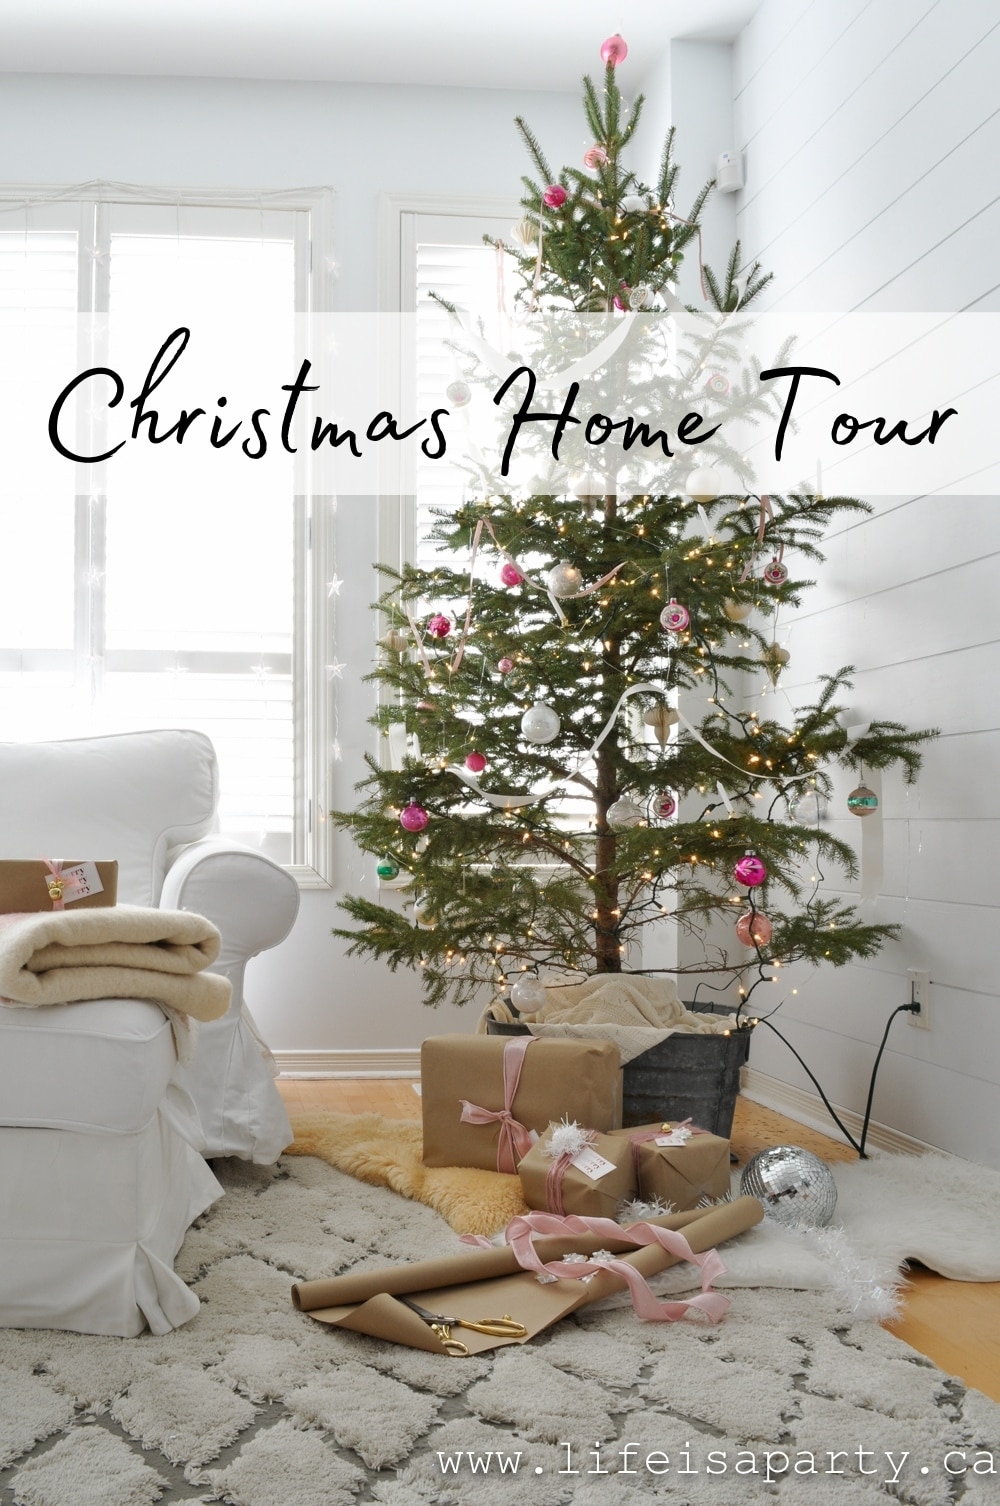 Pink Christmas Decor Home Tour: a boho rustic Scandinavian style home gets touches of pink and vintage for Christmas this year.